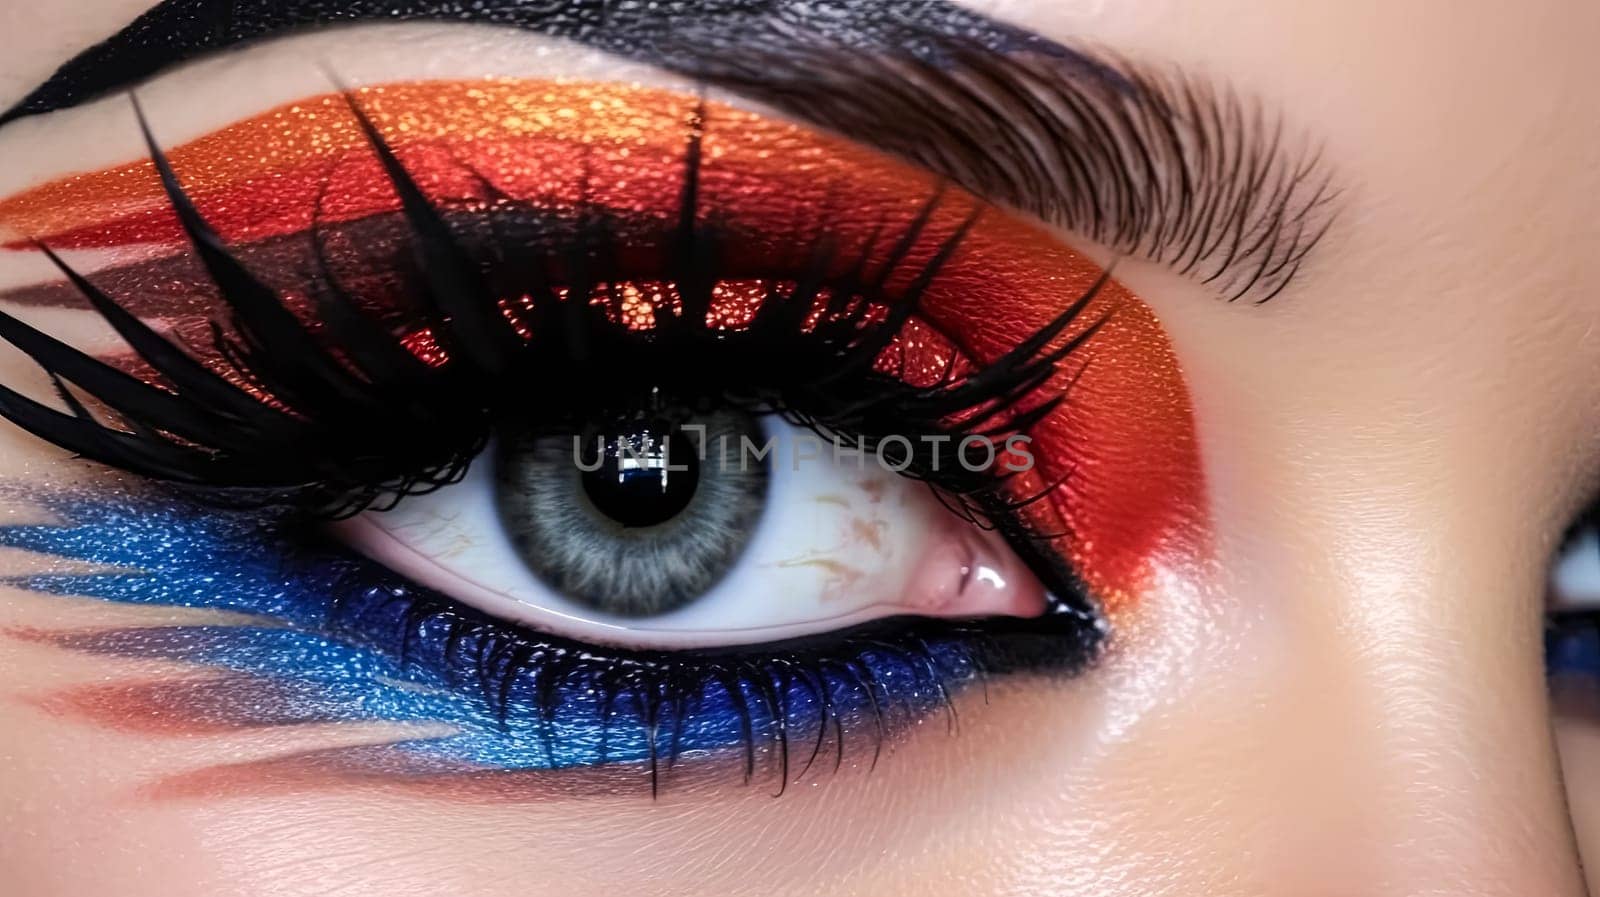 A woman's eye is painted with orange and blue eyeshadow. The eye is the main focus of the image, and the colors of the eyeshadow create a bold and striking look